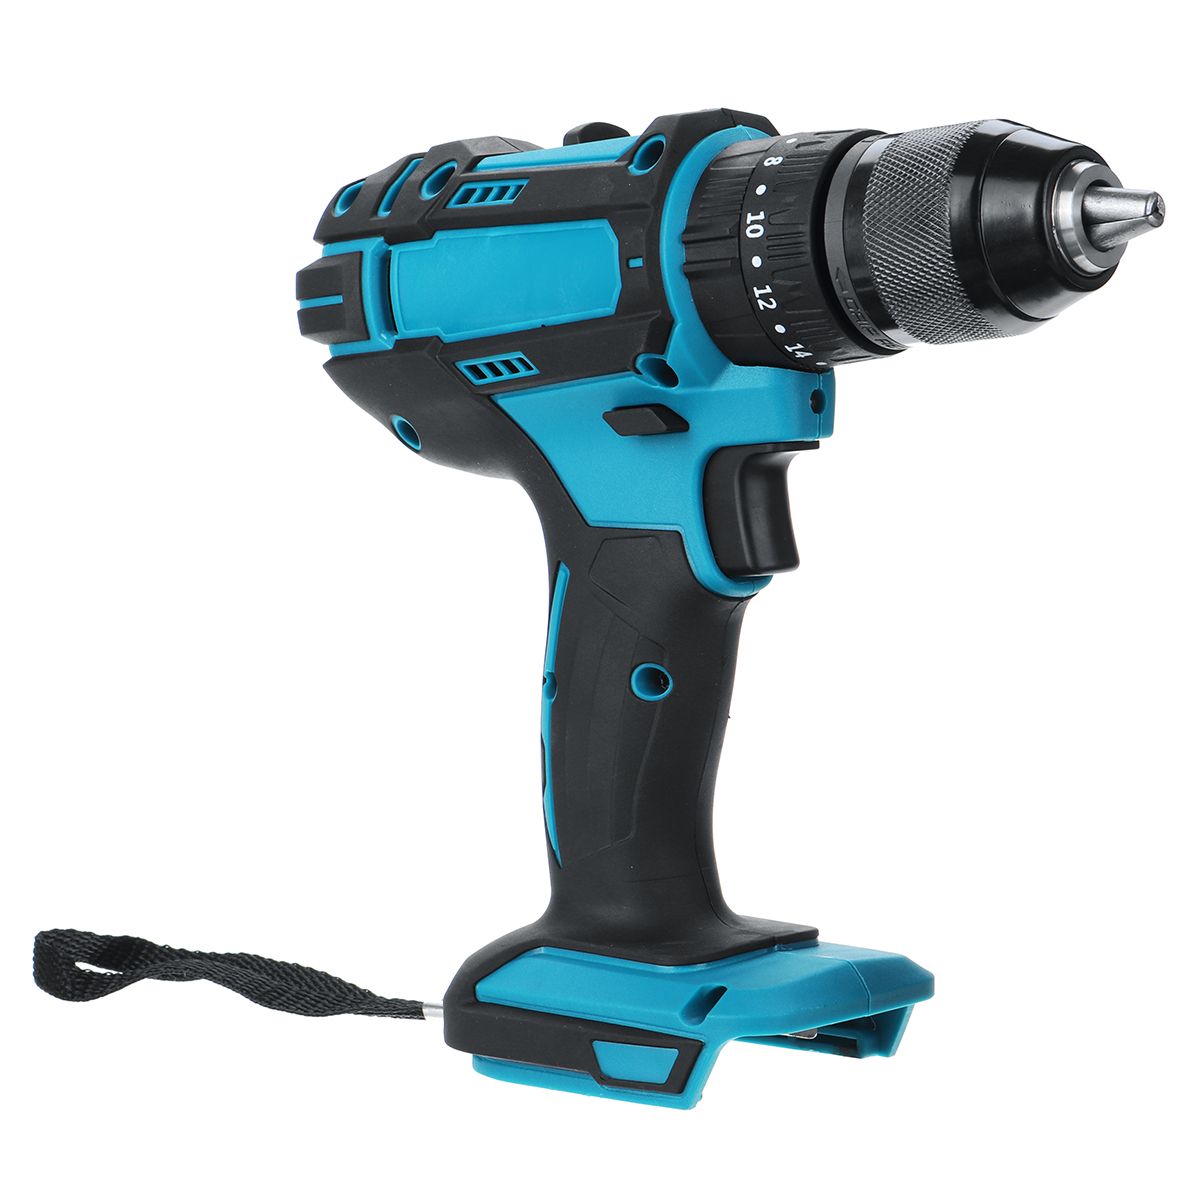 10mm-Chuck-Impact-Drill-350Nm-Cordless-Electric-Drill-For-Makita-18V-Battery-4000RPM-LED-Light-Power-1642853